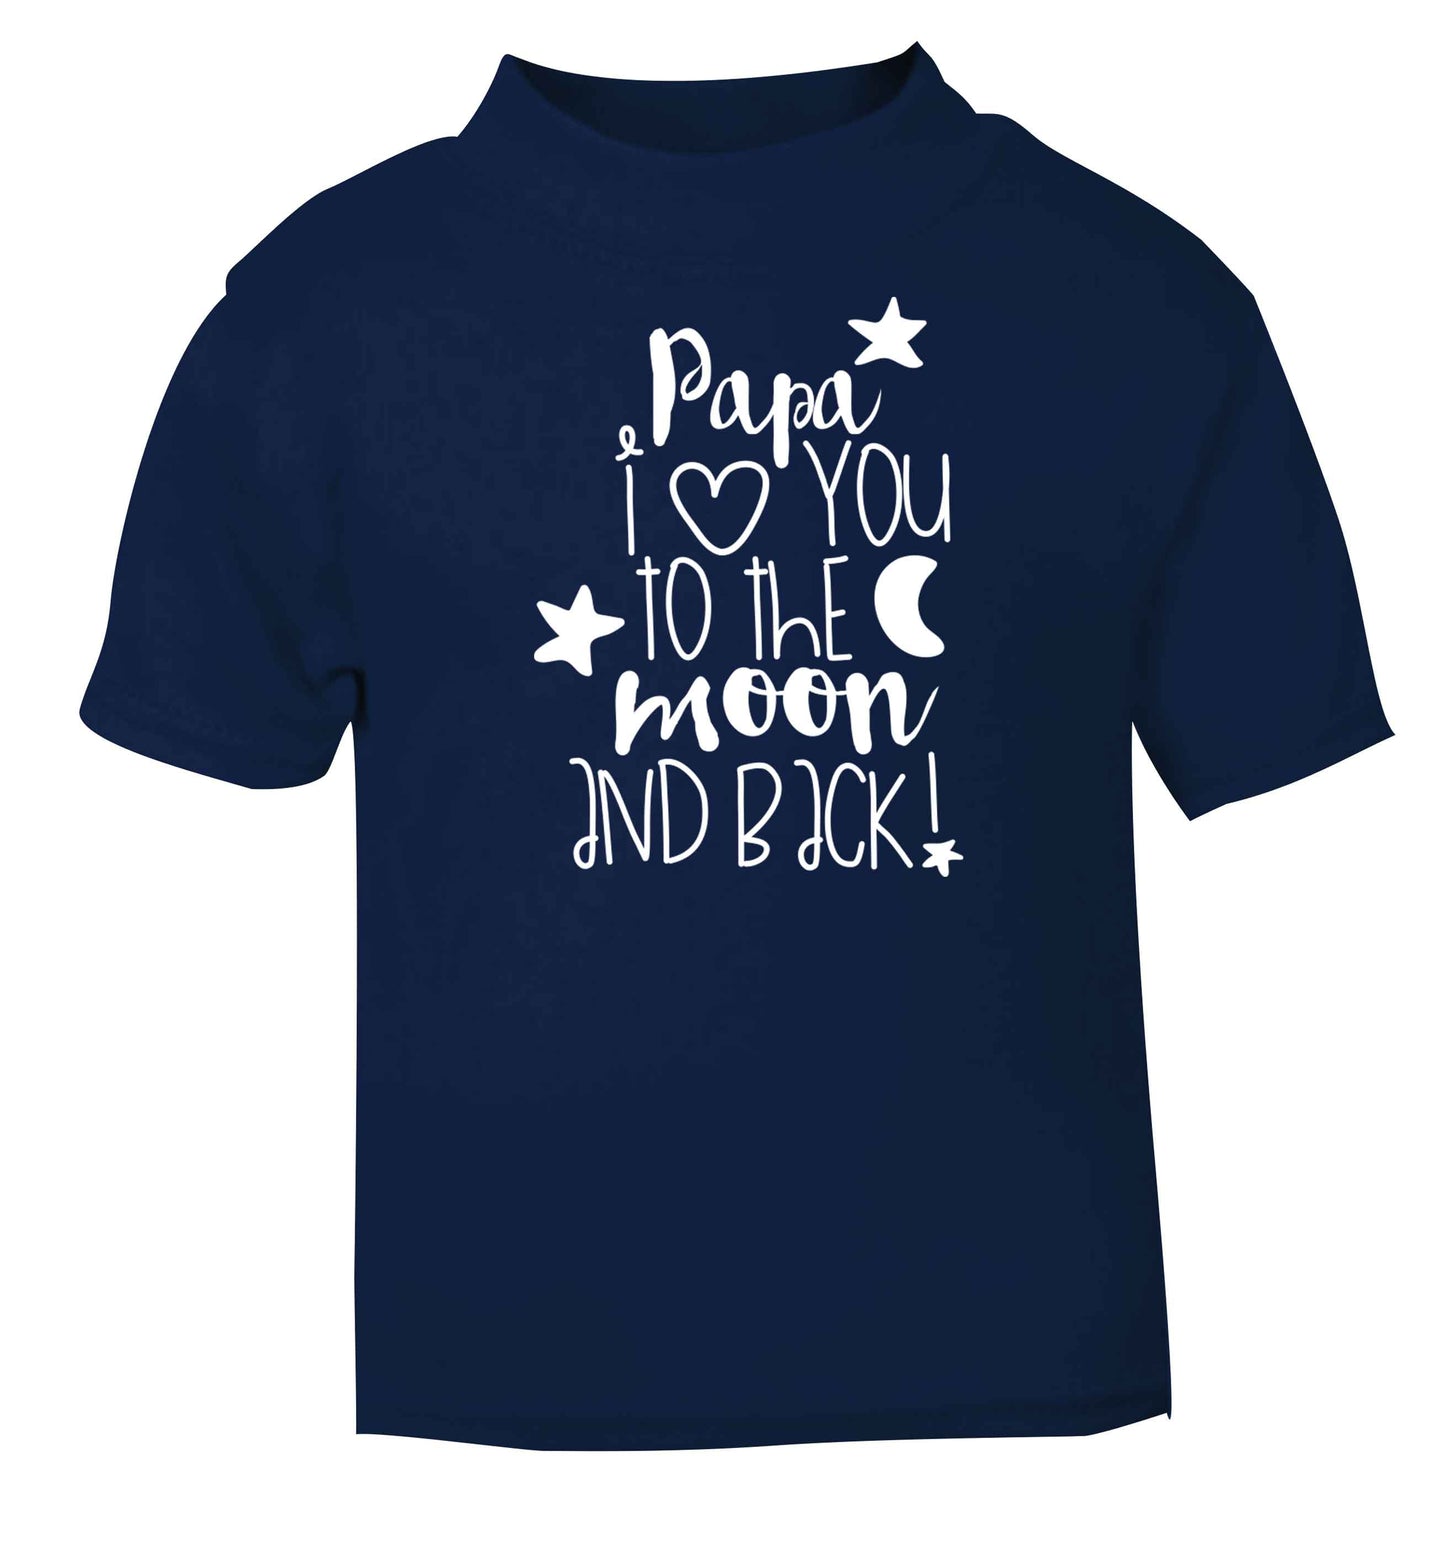 Papa I love you to the moon and back navy baby toddler Tshirt 2 Years